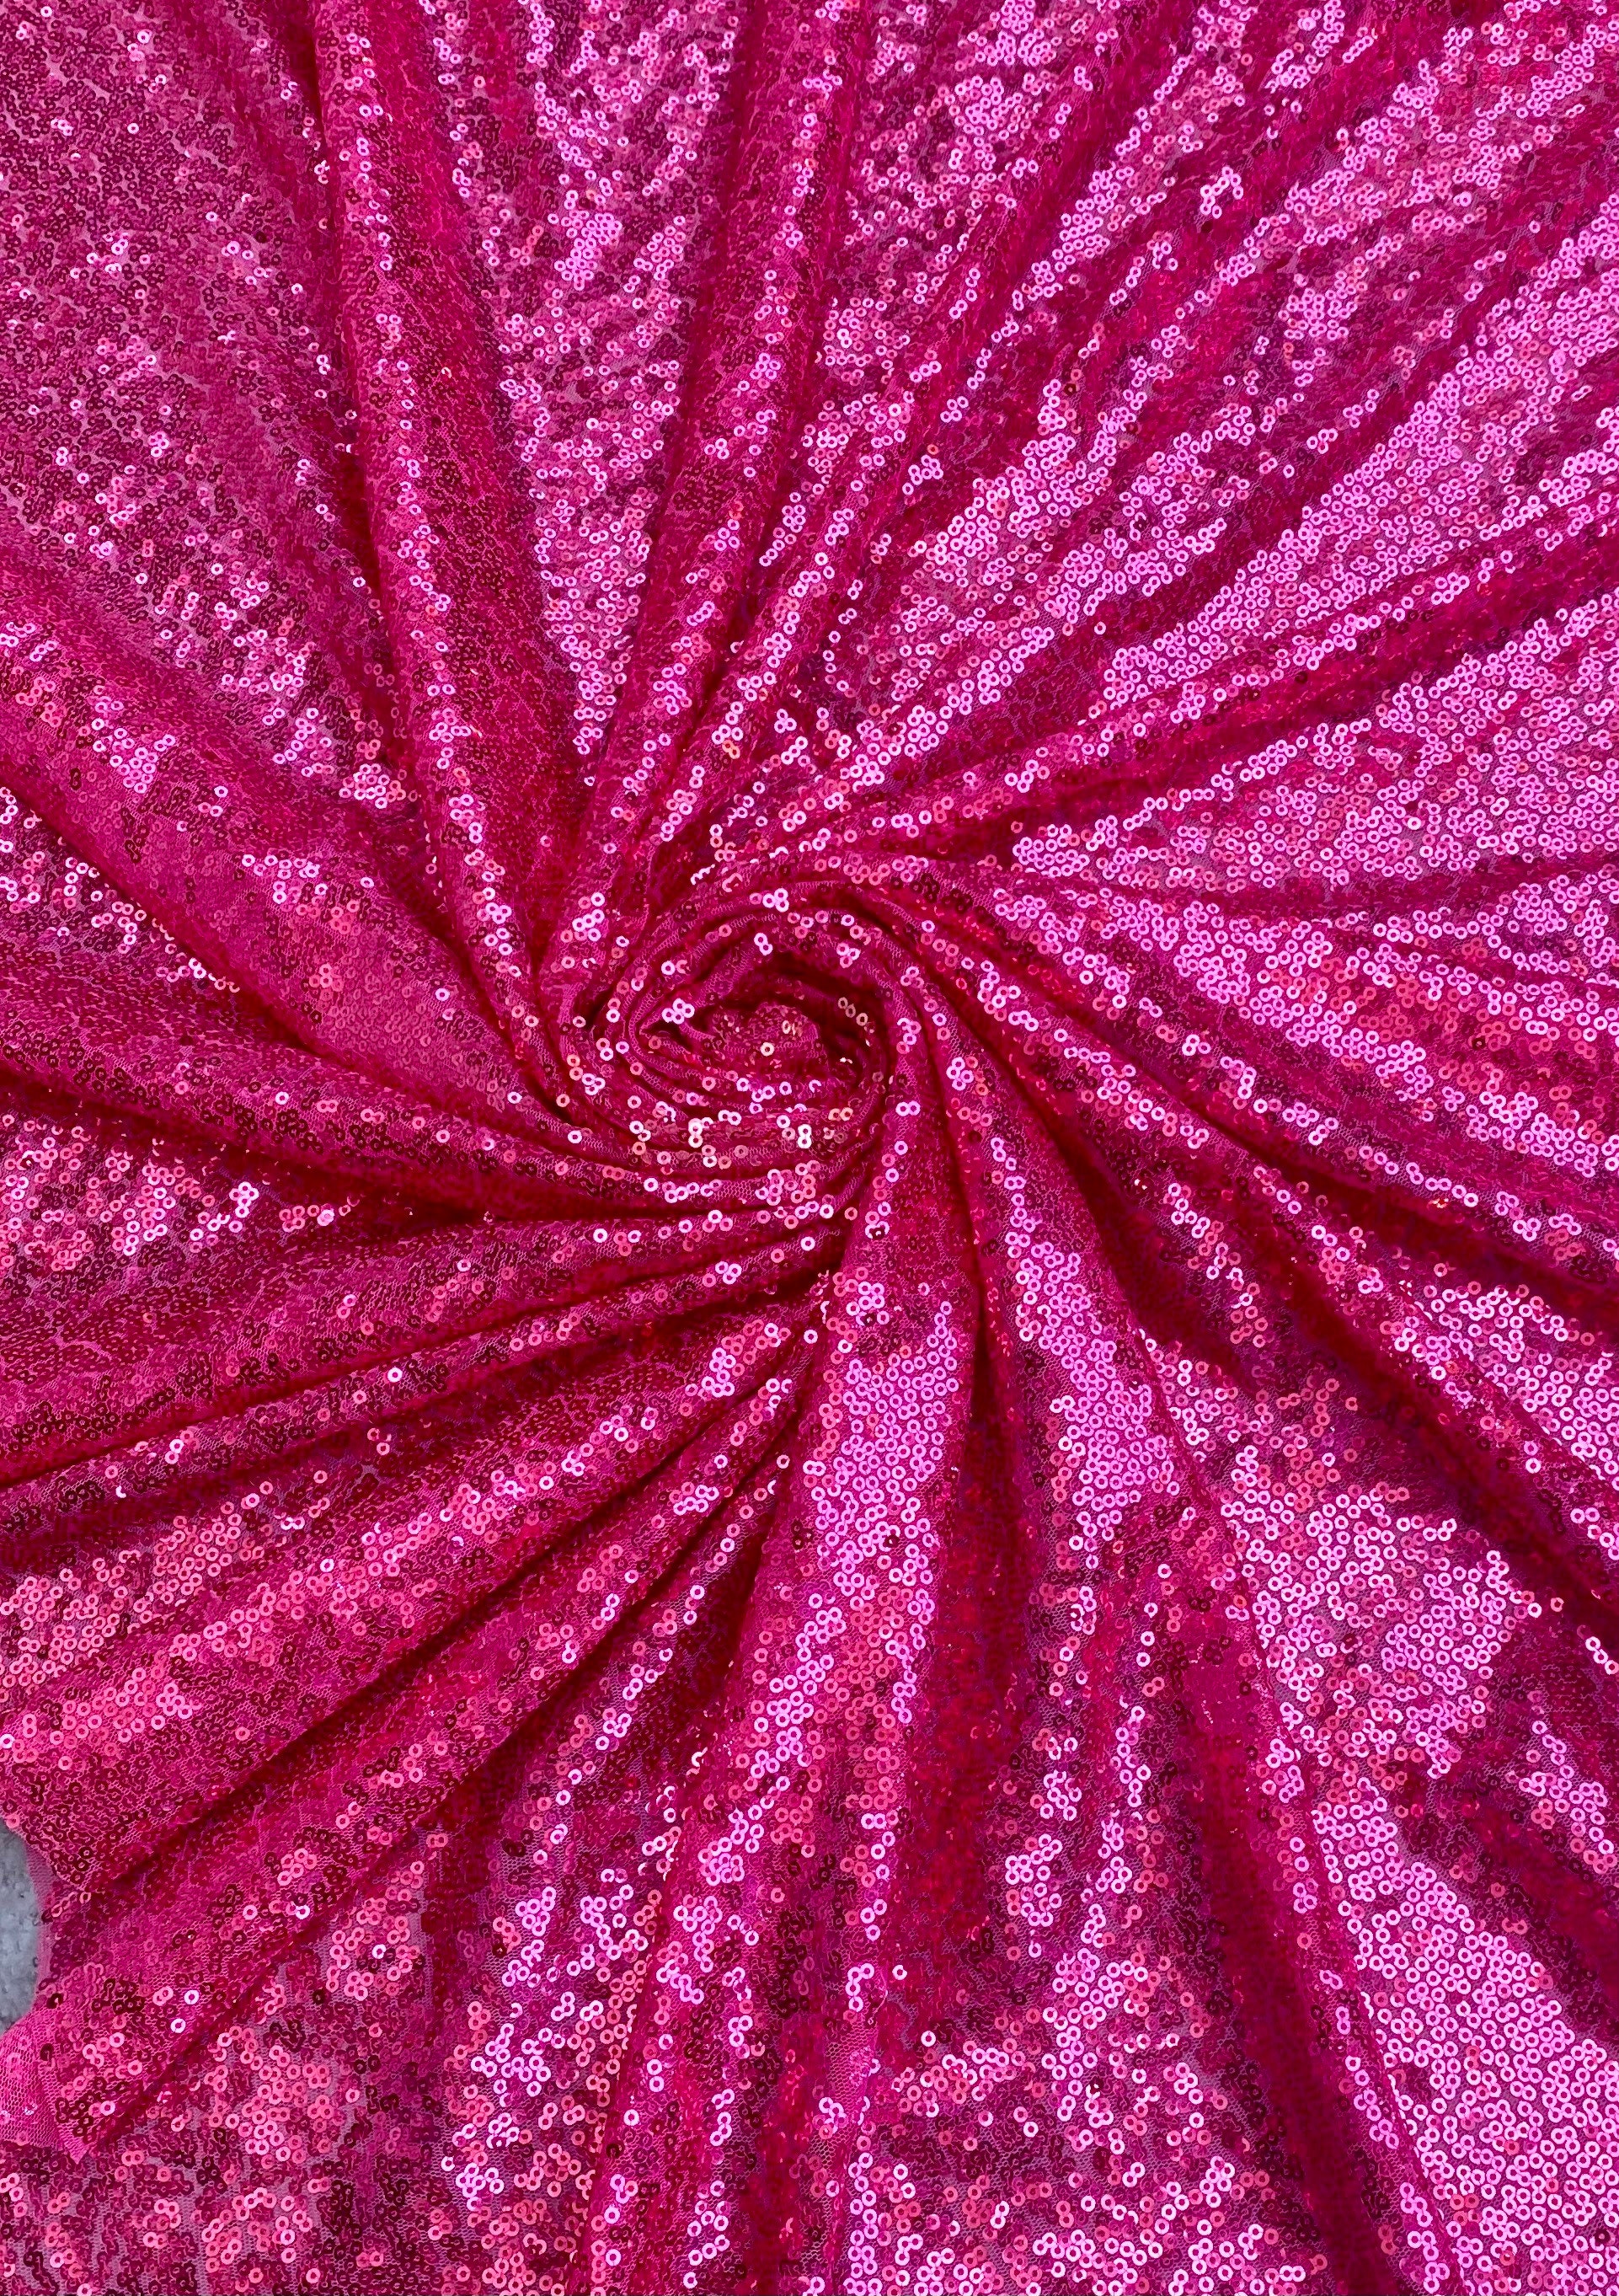 FUHSY Hot Pink Sequin Fabric by The Yard 2 Yards Stretch Velvet Fabric  Fuchsia Upholstery Fabric Velvet Sequins for Crafts Sparkle Material Dress  Fabric Sequin Cloth Sewing Fabric for Gifts Costumes 